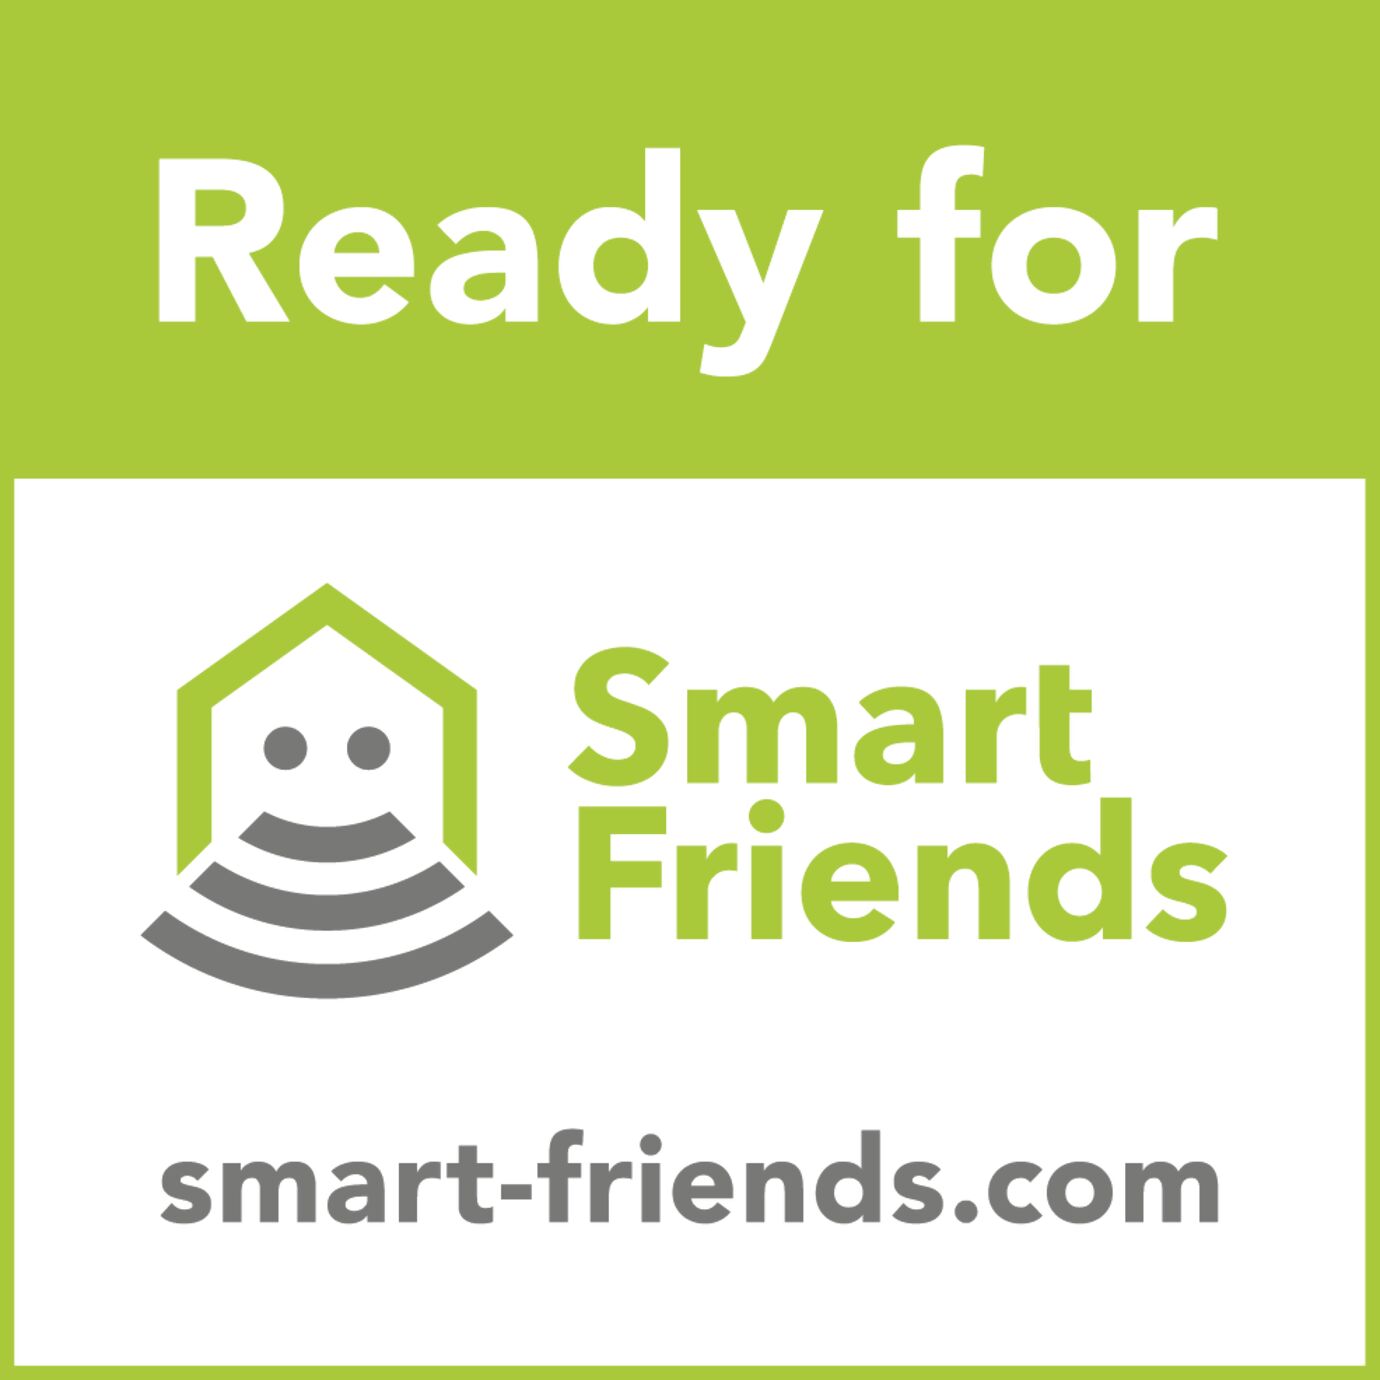 smart-home-smart friends-logo ready for.png